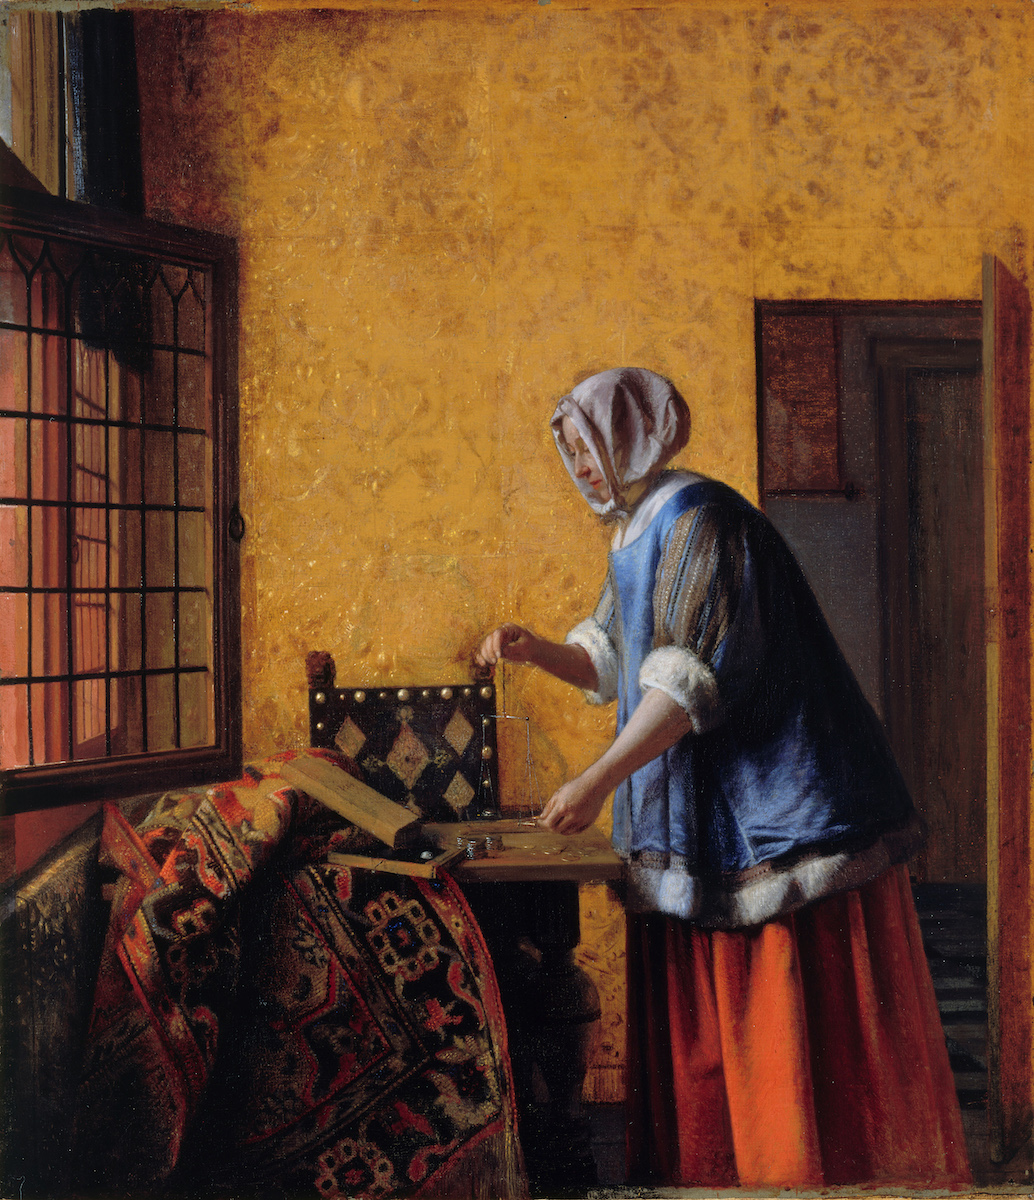 Woman Weighing Gold and Silver Coins, ca. 1664. SMB, Gemäldegalerie, Property of Kaiser Friedrich Museumsvereins, photo: Jörg P. Anders